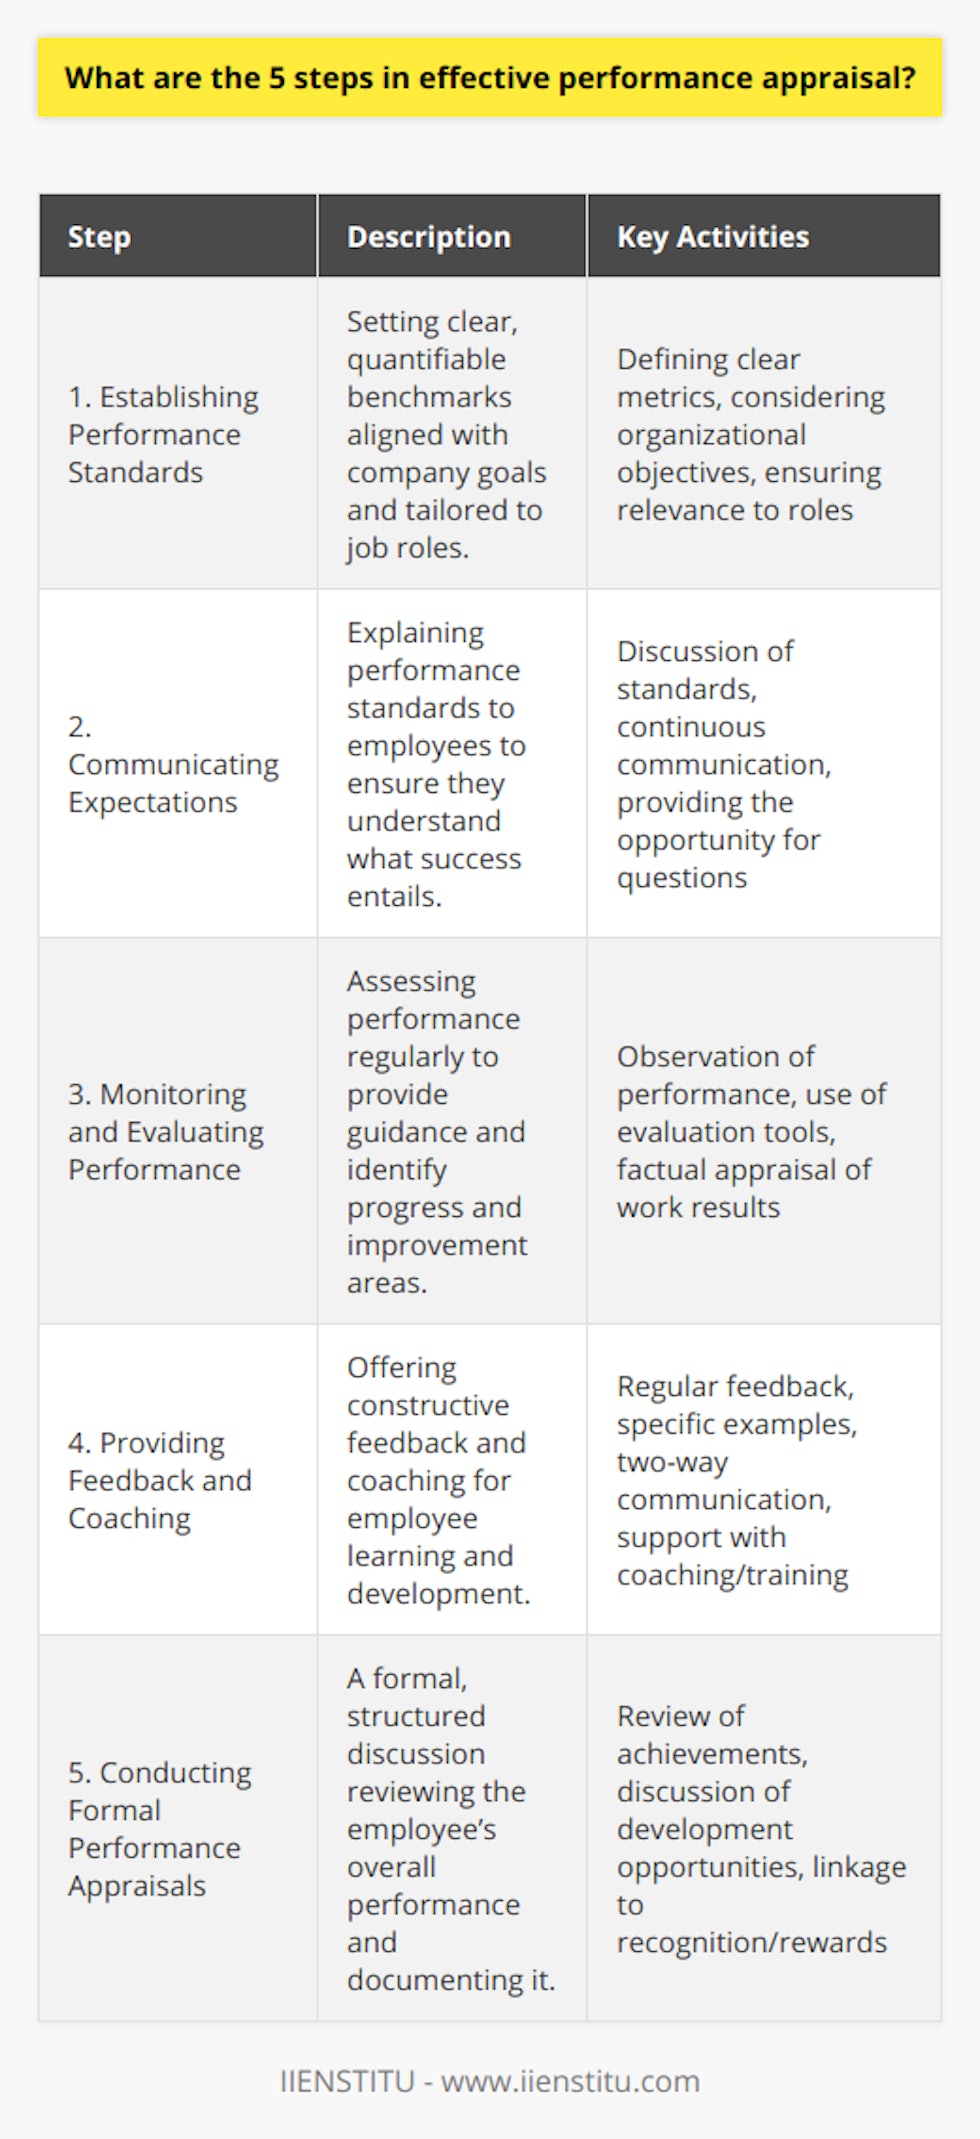 Effective performance appraisals are vital tools​ for both managers and employees to ensure understanding, improve job performance, and foster professional development. Here are the five steps in creating and executing an effective performance appraisal:Establishing Performance Standards:The cornerstone of an effective appraisal system is setting clear performance standards. These benchmarks should align with the broader goals of the organization and be tailored to specific job roles and responsibilities. Performance standards must be quantifiable and observable to eliminate ambiguity and subjectivity. By doing this, employees know precisely the criteria upon which their performance will be assessed.Communicating Expectations:Clear communication is the next vital step. Managers or supervisors should explain these performance standards to team members to ensure full understanding. This helps establish a mutual agreement on what success looks like. Moreover, communicating expectations isn’t a one-off event; it should be an ongoing conversation. Employees should be encouraged to seek clarification on any aspect of their responsibilities at any time.Monitoring and Evaluating Performance:Regular monitoring of performance against the established standards helps identify both progress and areas needing attention. This step is not intended to micromanage but to provide supportive guidance. Evaluation should be factual, focusing on actual performance rather than personal characteristics. Tools such as self-evaluations, peer reviews, and customer feedback can be valuable inputs for an all-rounded assessment.Providing Feedback and Coaching:Constructive feedback is crucial for learning and development. Managers should consistently provide feedback, highlighting specific examples of what an employee is doing well and areas for improvement. It should be a two-way conversation where employees feel valued and heard. In addition to feedback, providing coaching and training to help employees improve and grow is an integral part of the performance appraisal process.Conducting Formal Performance Appraisals:The culmination of the process is the formal performance appraisal meeting. This is a structured discussion where the employee's overall performance is formally documented and reviewed. The conversation should be balanced, recognizing achievements and discussing development opportunities. The formal appraisal is also a strategic moment to link performance with recognition and possible rewards, such as bonuses or promotion opportunities, thereby closing the loop of the appraisal cycle.In conclusion, an effective performance appraisal process is comprehensive and ongoing, far from being just a yearly meeting. It is about setting clear expectations, maintaining open lines of communication, monitoring progress, giving feedback, and acknowledging efforts. It should ideally be a collaborative and positive experience for both the employer and employee, leading to continuous improvement and business growth. IIENSTITU, alongside other organizations, may integrate such a structured appraisal system for maintaining high levels of employee satisfaction and organizational efficiency.